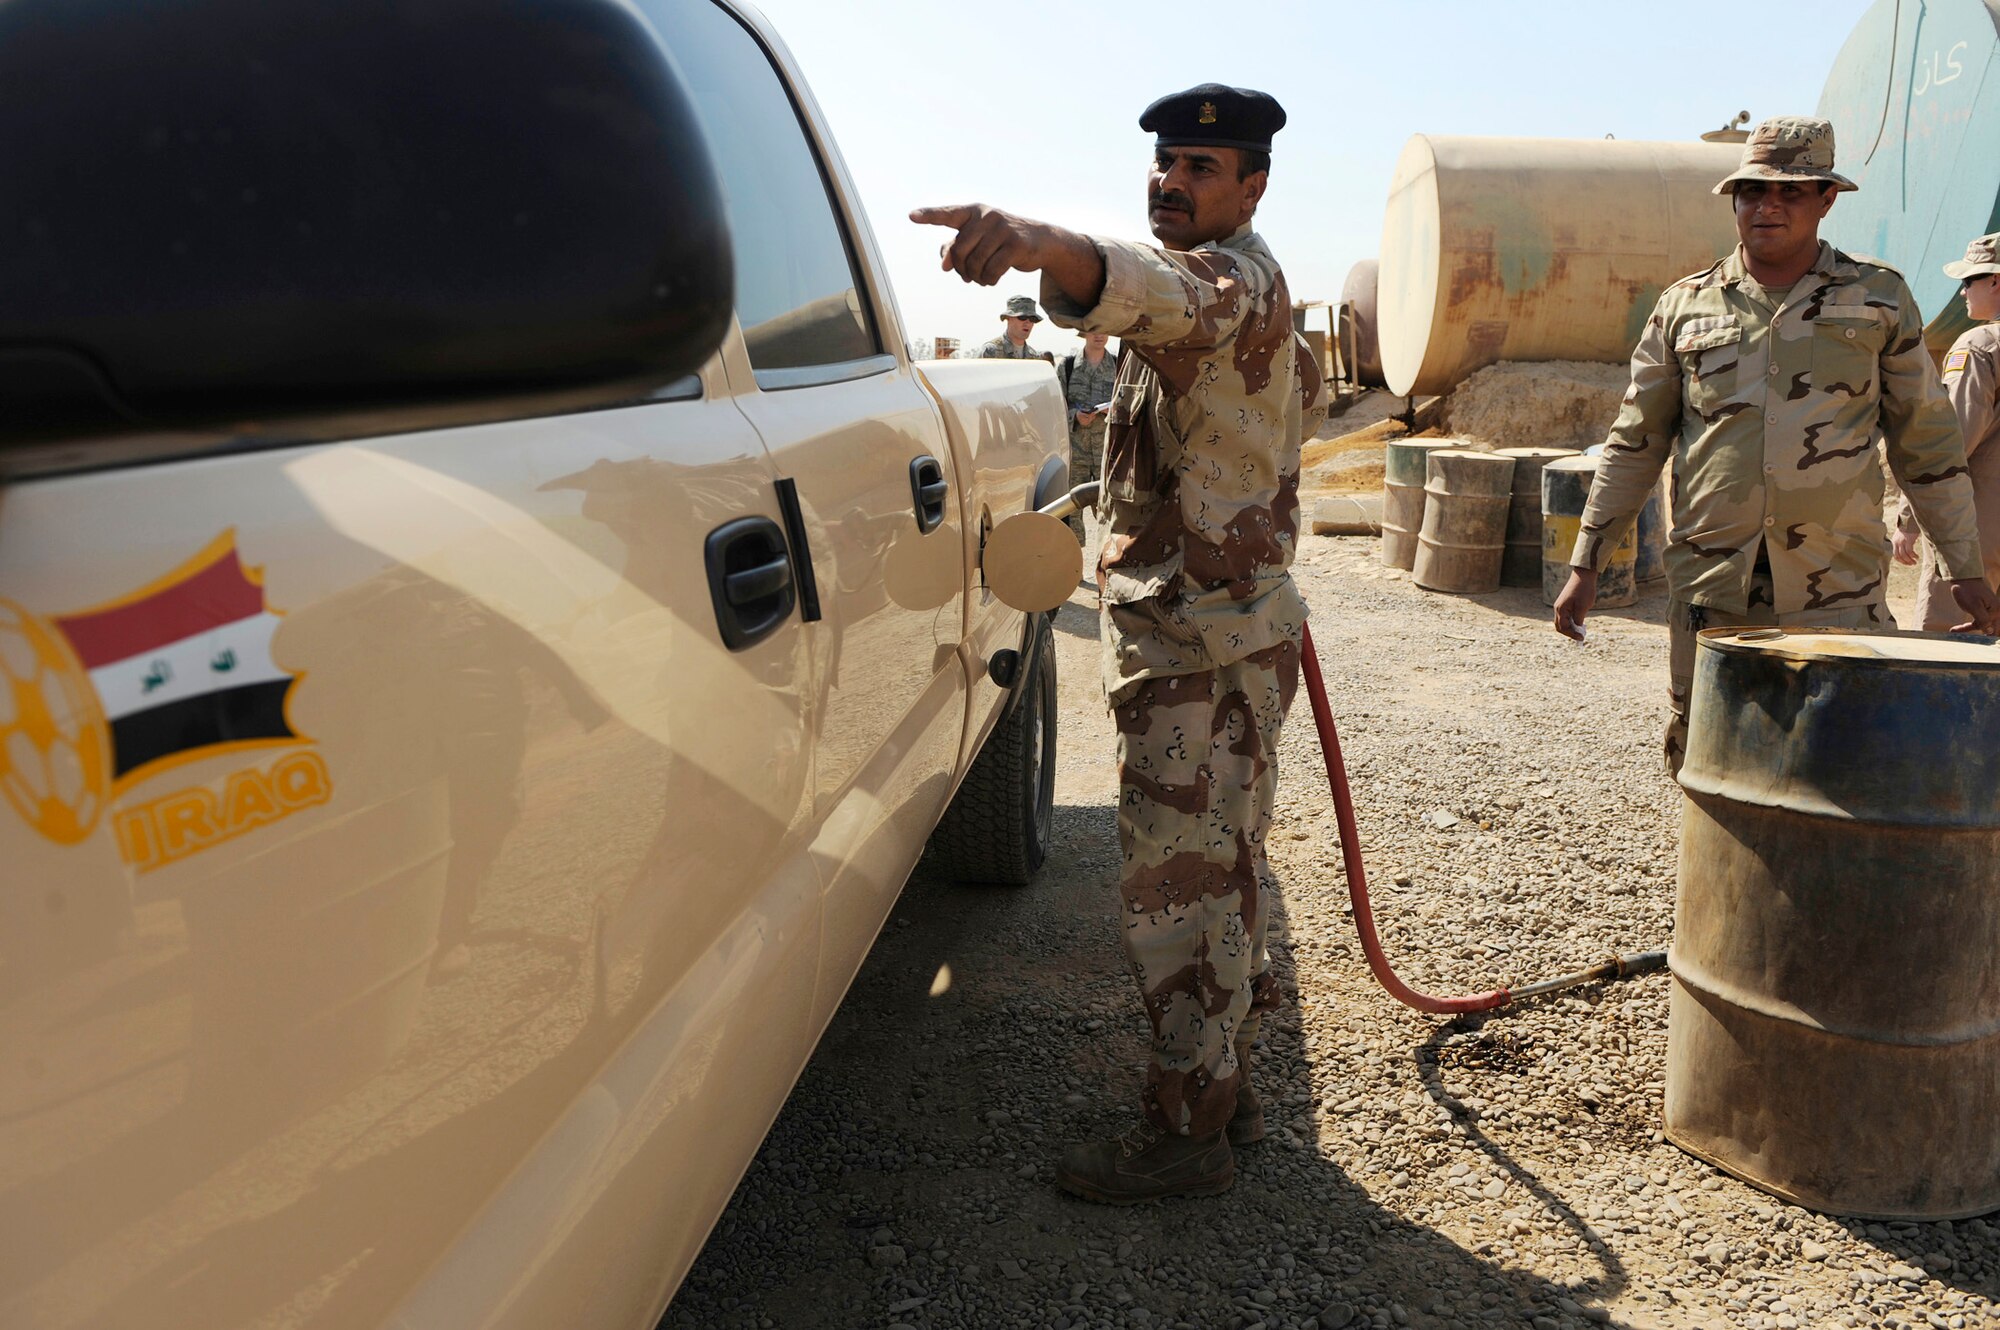 Iraqi soldiers refuel their vehicles July 11 at Camp Taji, Iraq. The Iraqi fuels depot is run exclusively by the Iraqi army with some assistance from an American Airman assigned to the Logistics Military Adviser Team. (U.S. Air Force photo/Staff Sgt. Michael B. Keller) 
